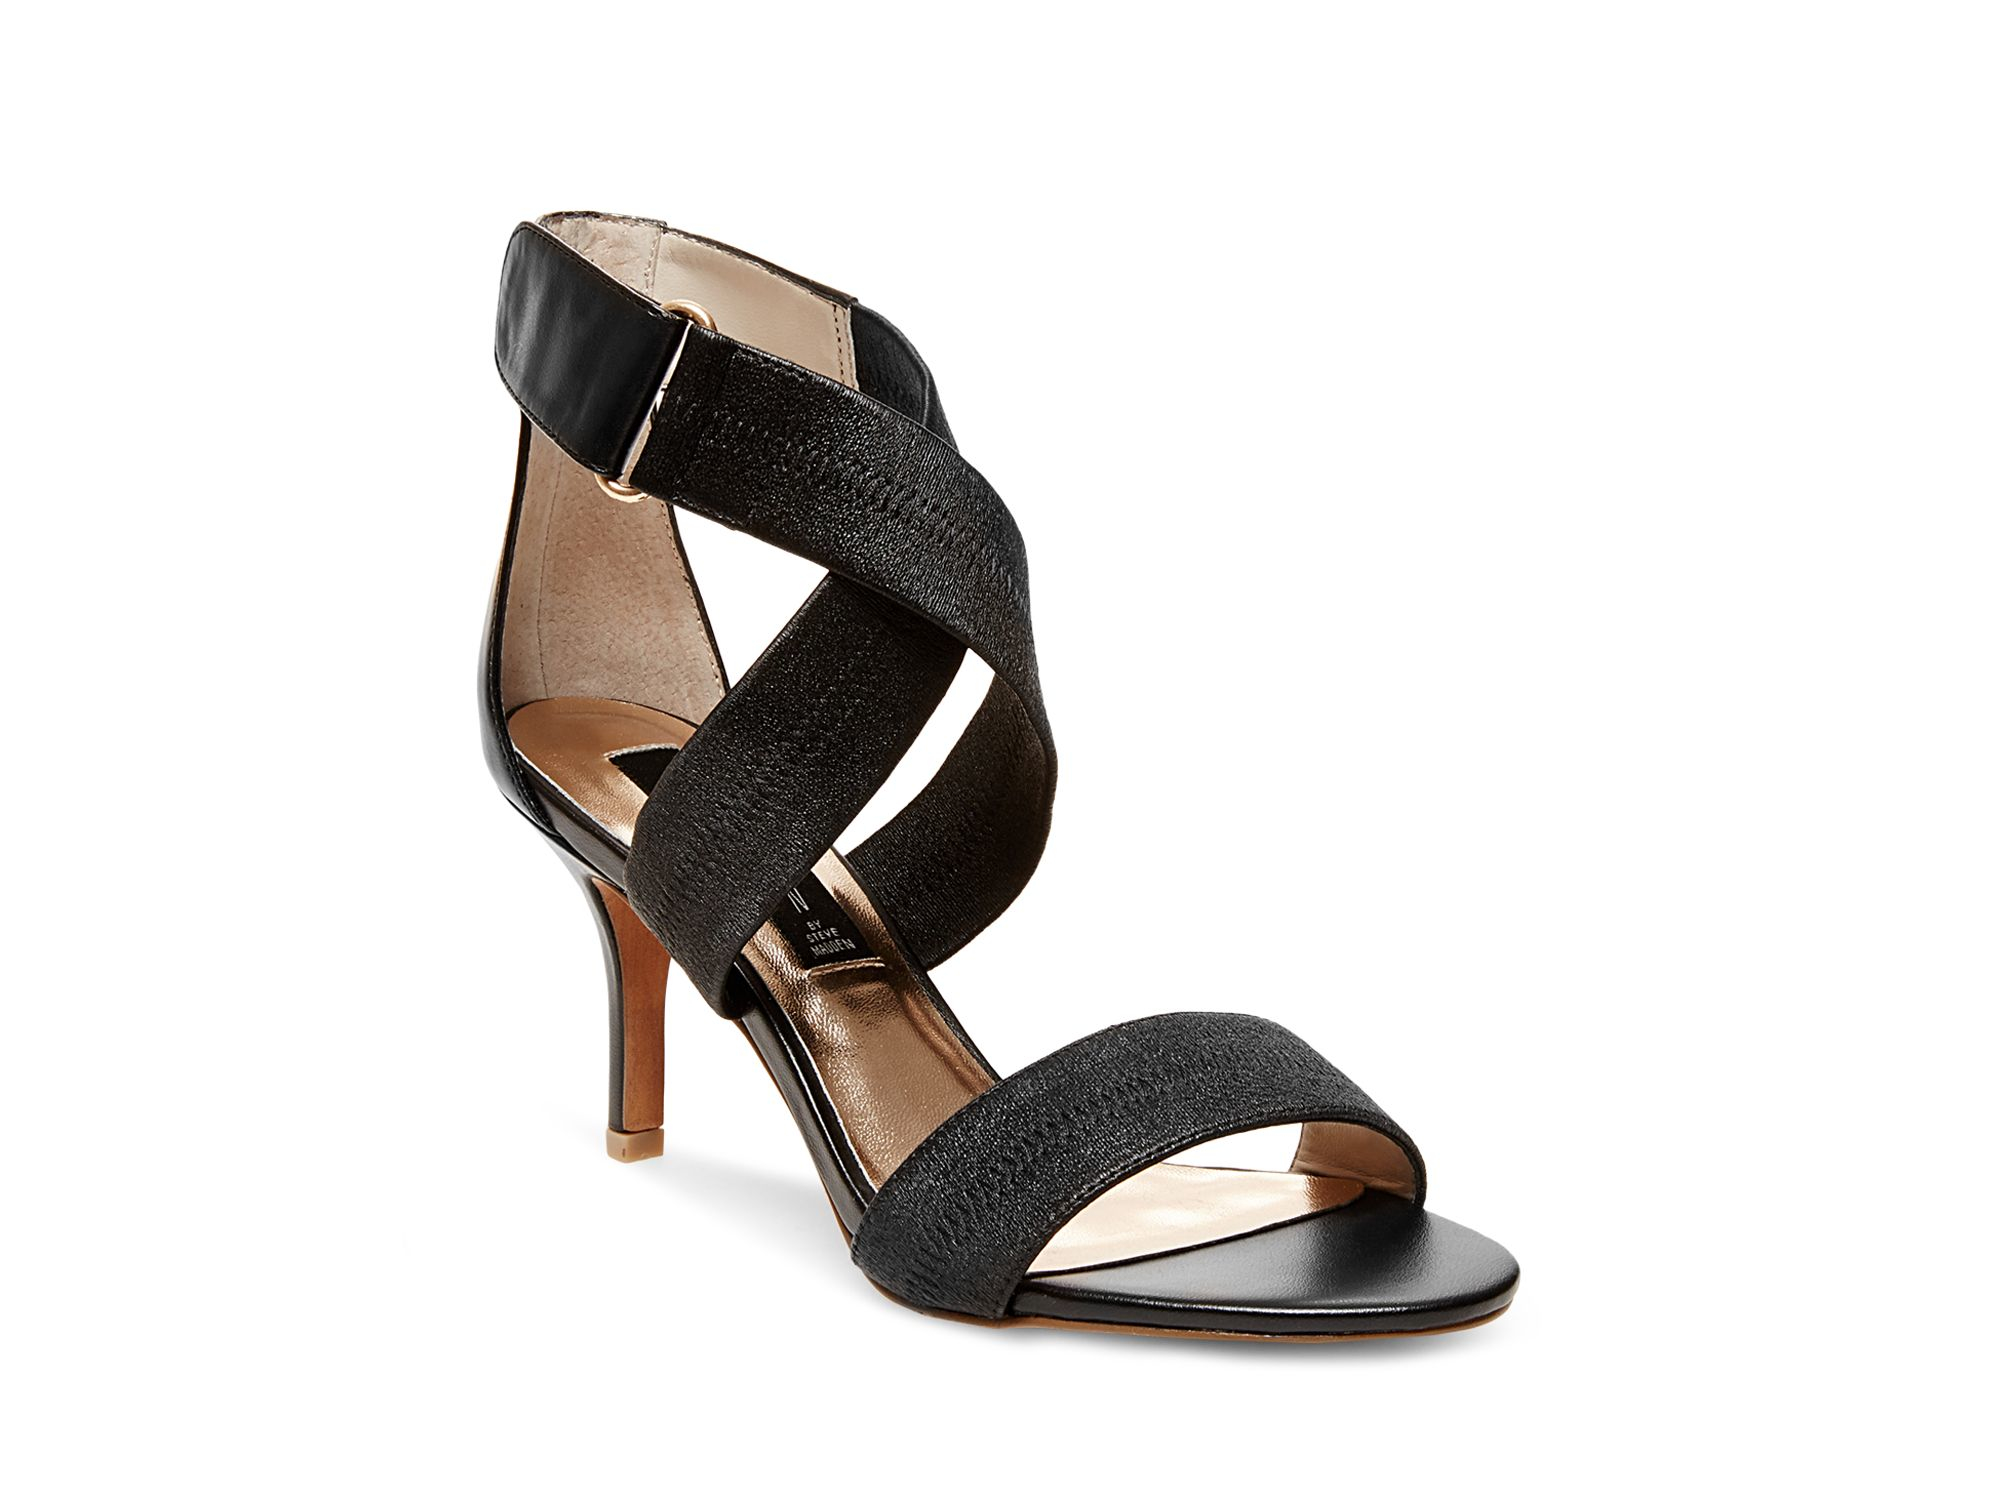 Lyst - Steven By Steve Madden Ankle-strap Sandals - Vaaale Elastic High ...